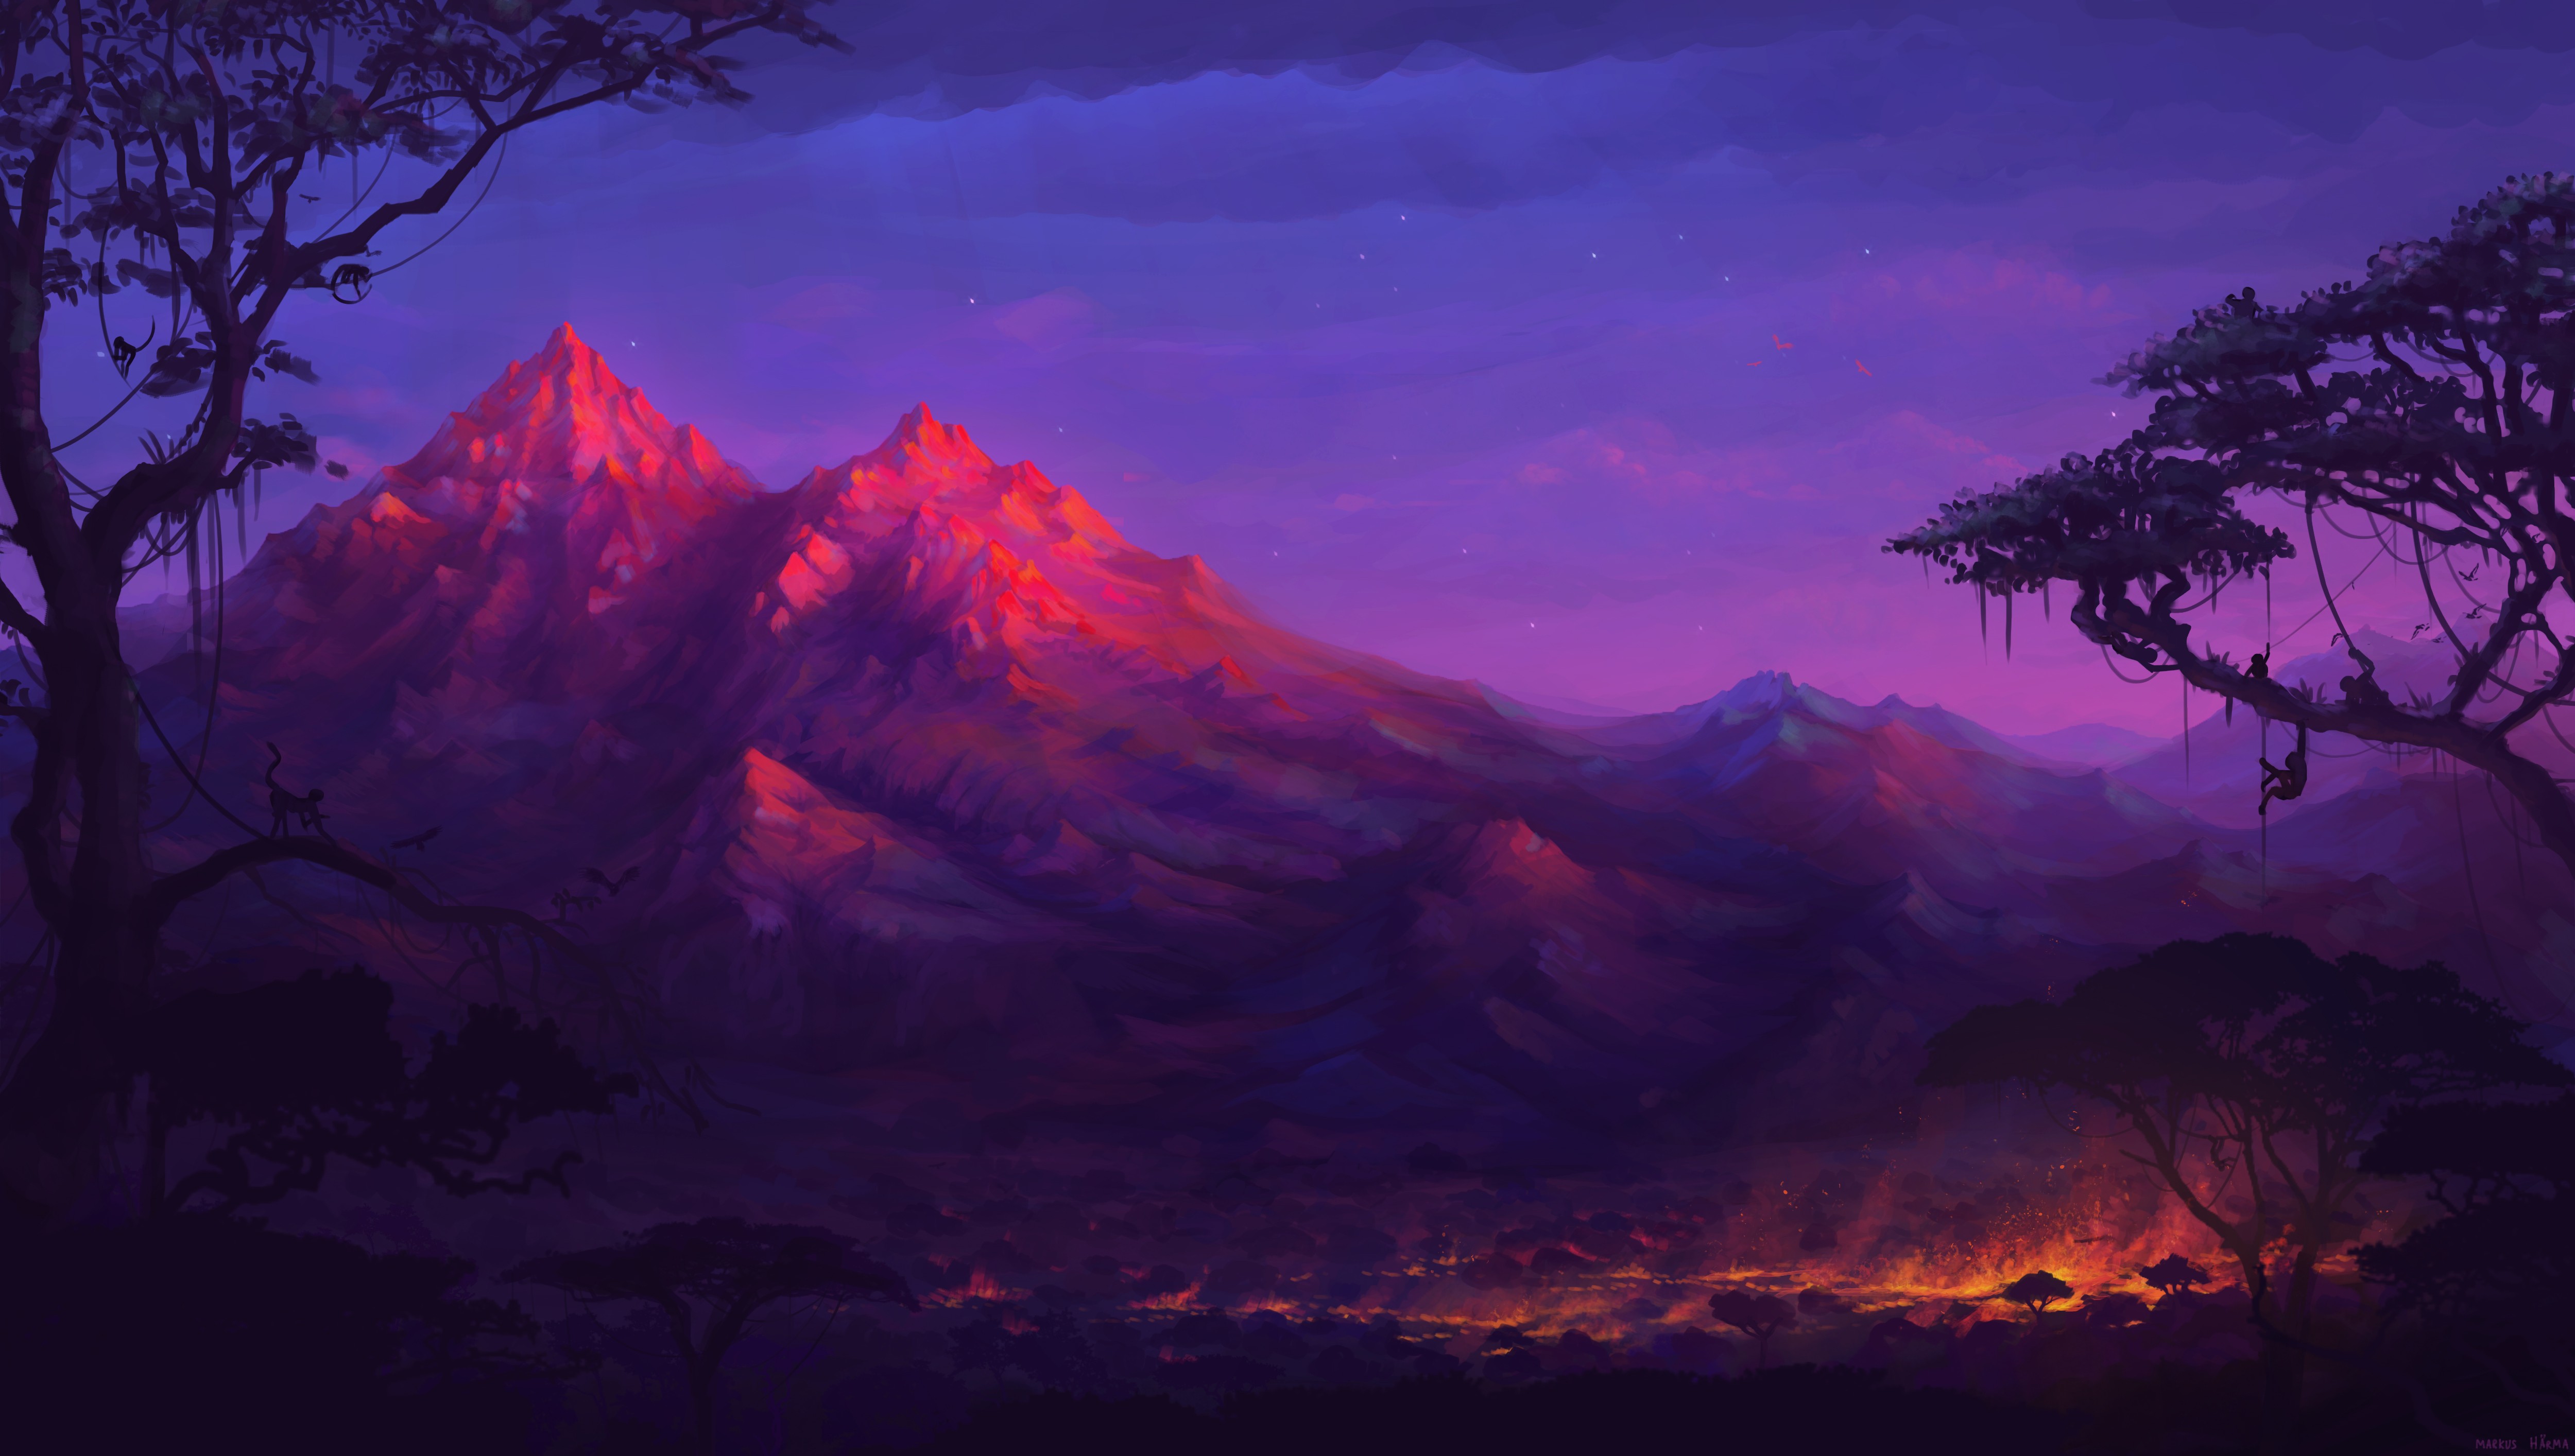 Forest Mountains Colorful Night Trees Fantasy Artwork 5k, HD Artist, 4k